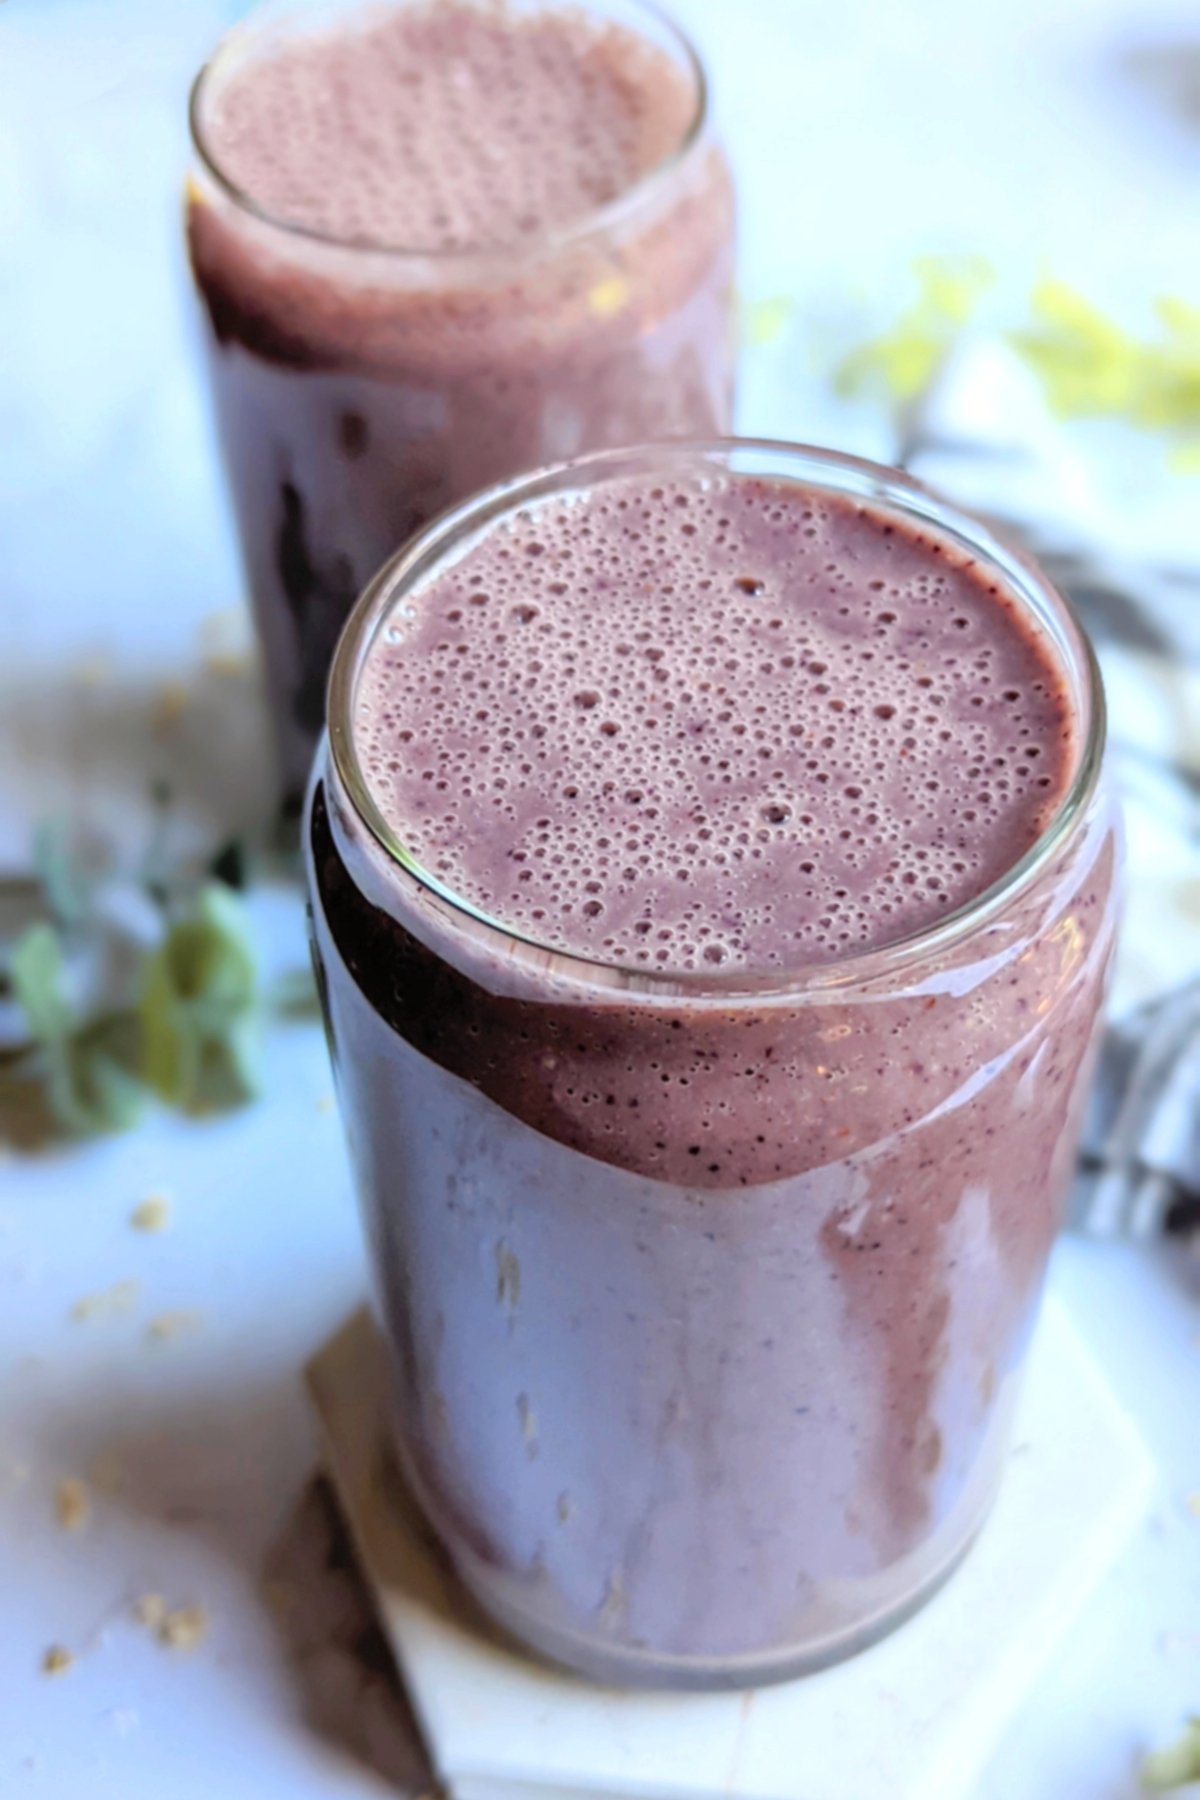 high fiber smoothie with oats for weight loss recipe antioxidant smoothie with berries and flaxseeds vegan gluten free and high protein breakfast ideas